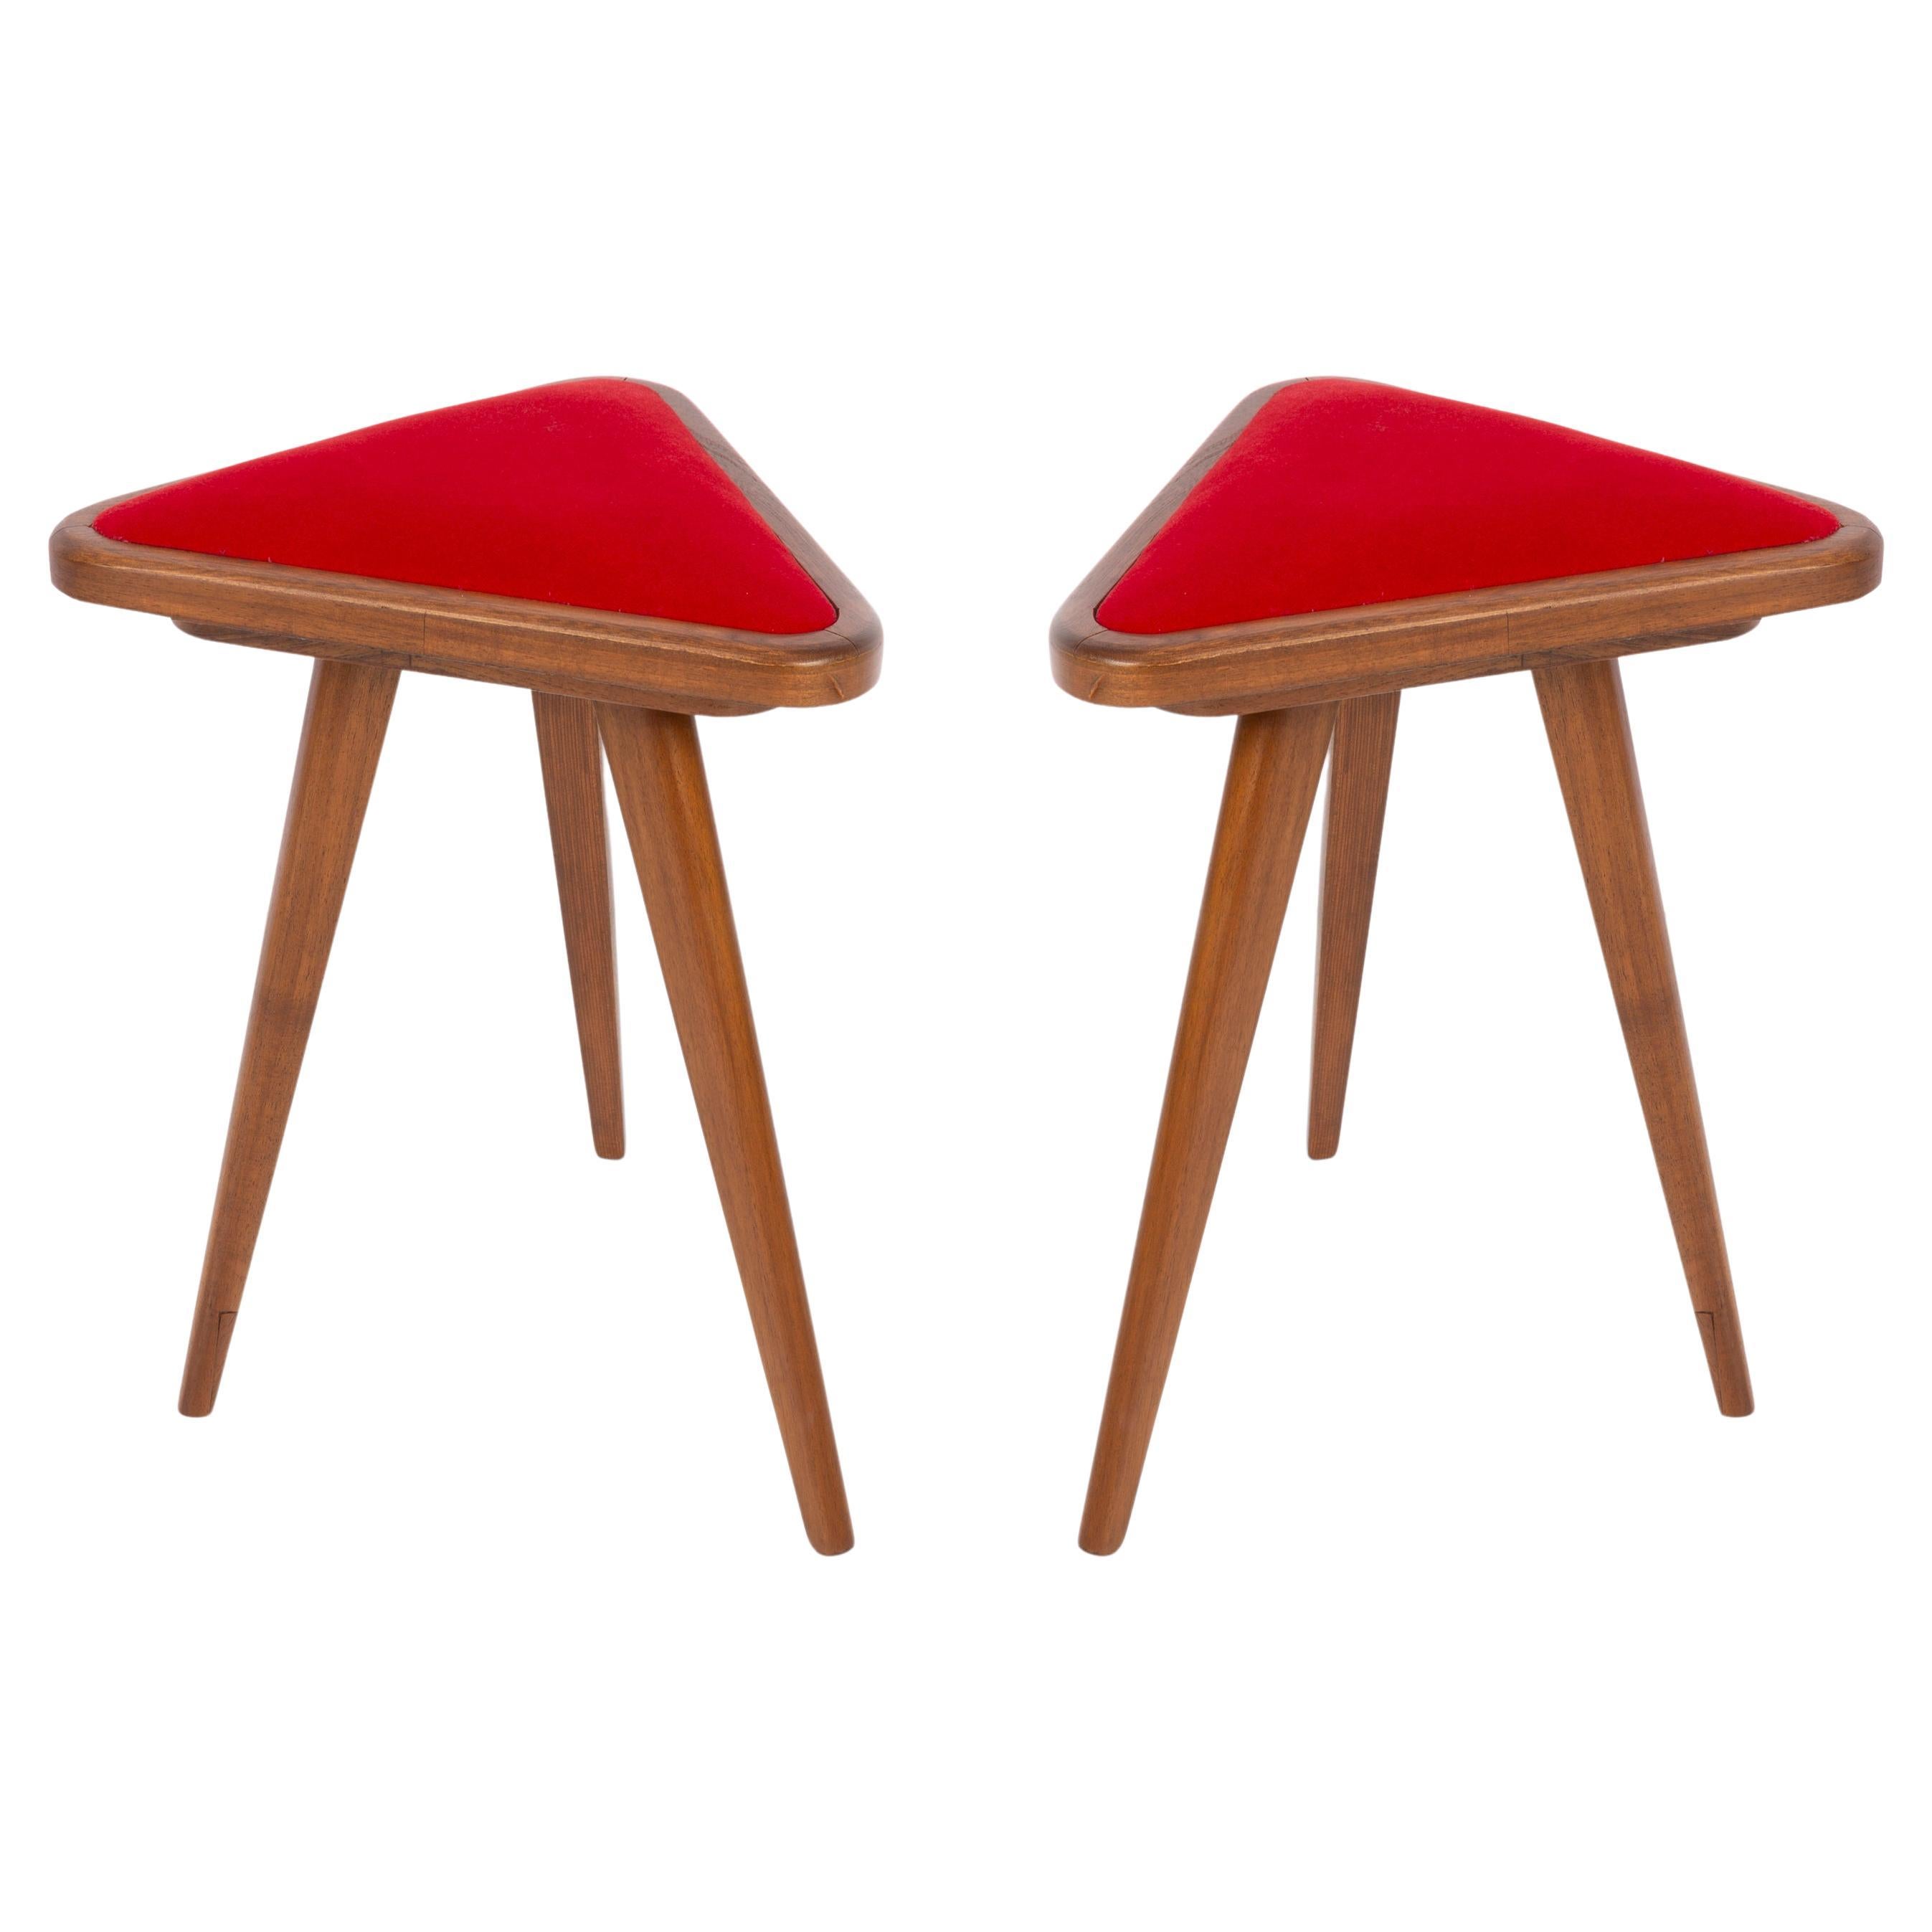 Set of Two Red Velvet 20th Century Triangle Stools, Europe, 1960s For Sale